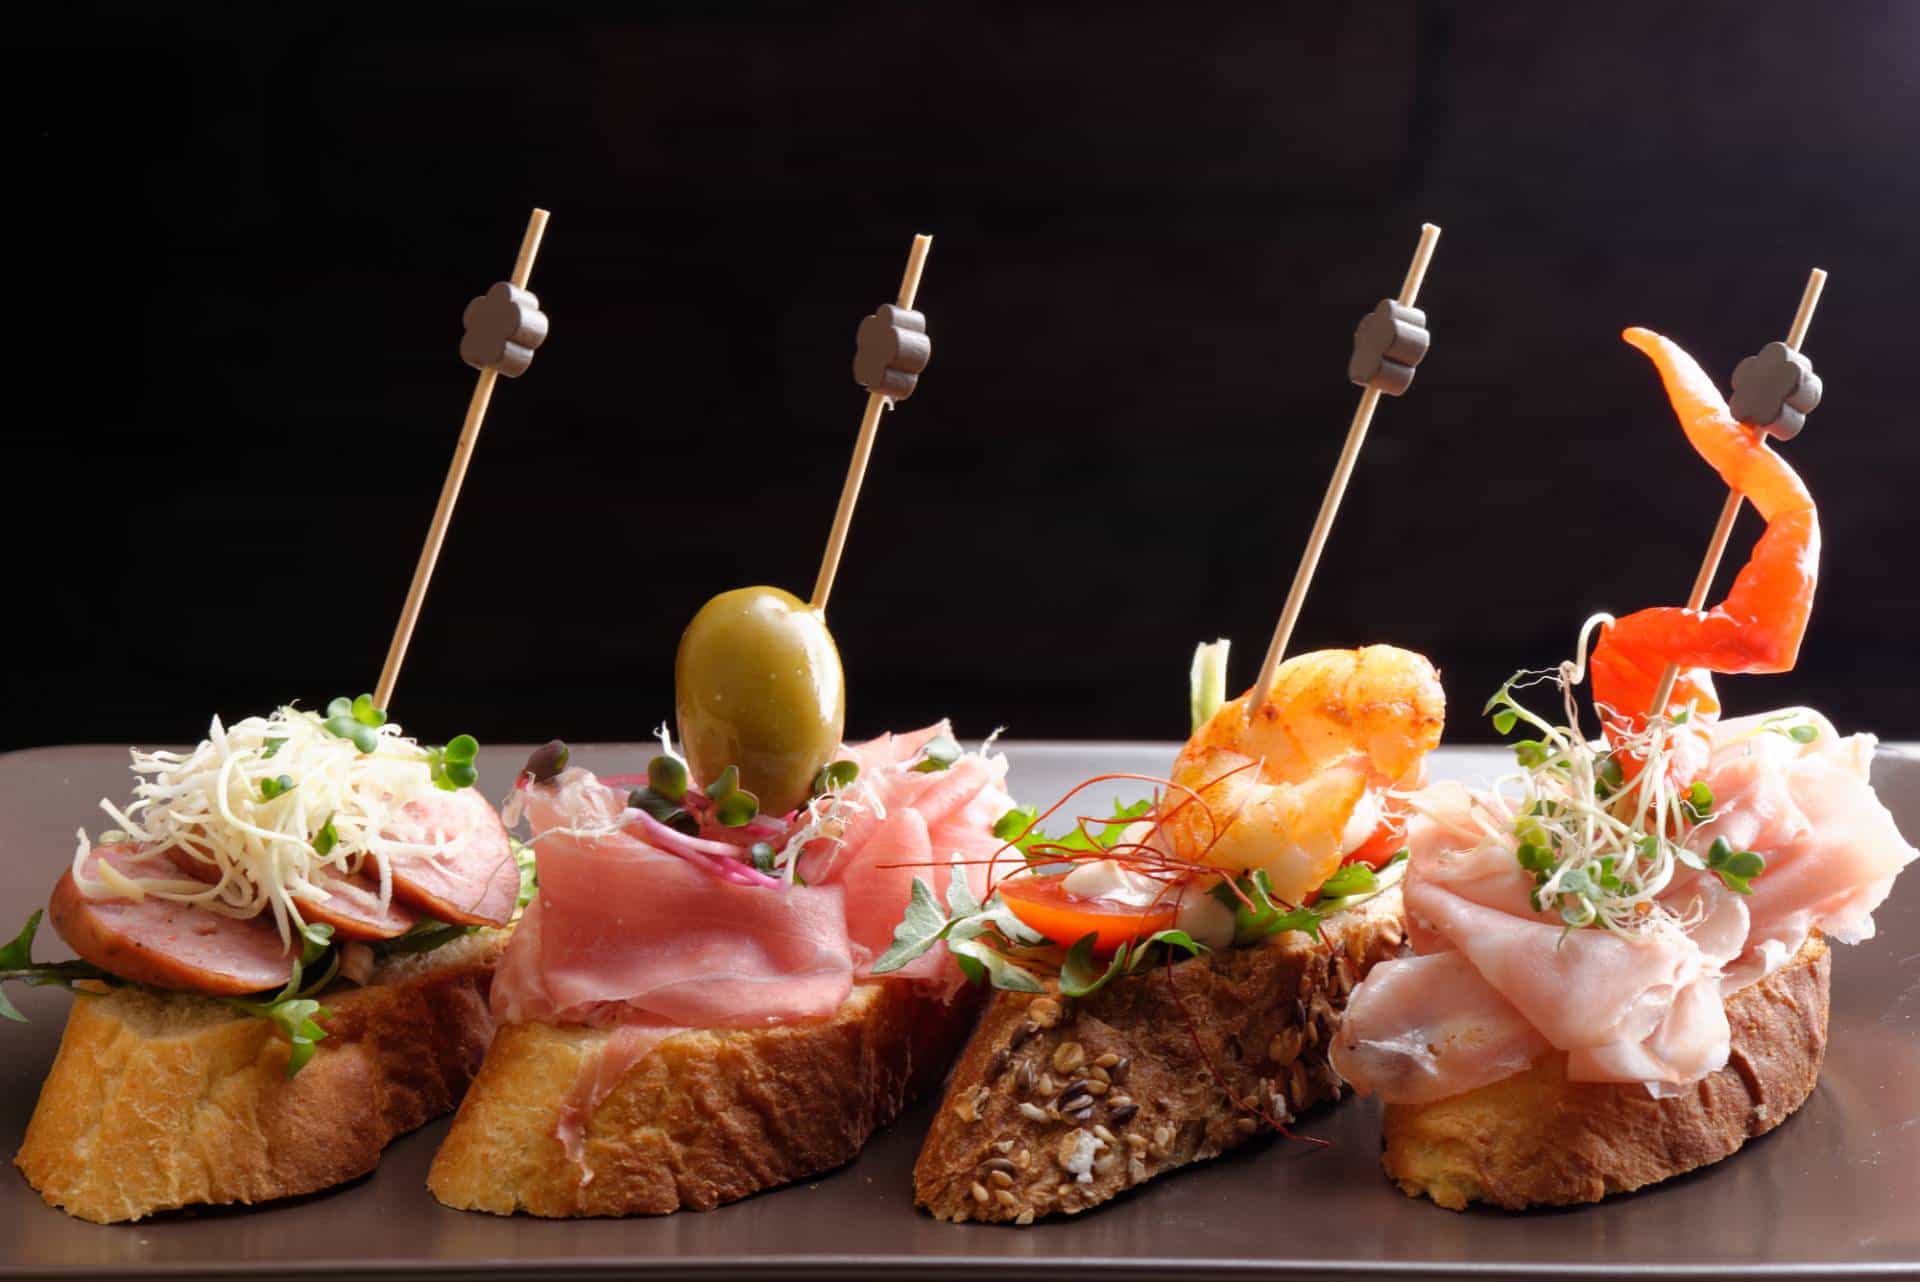 What are Spanish tapas?